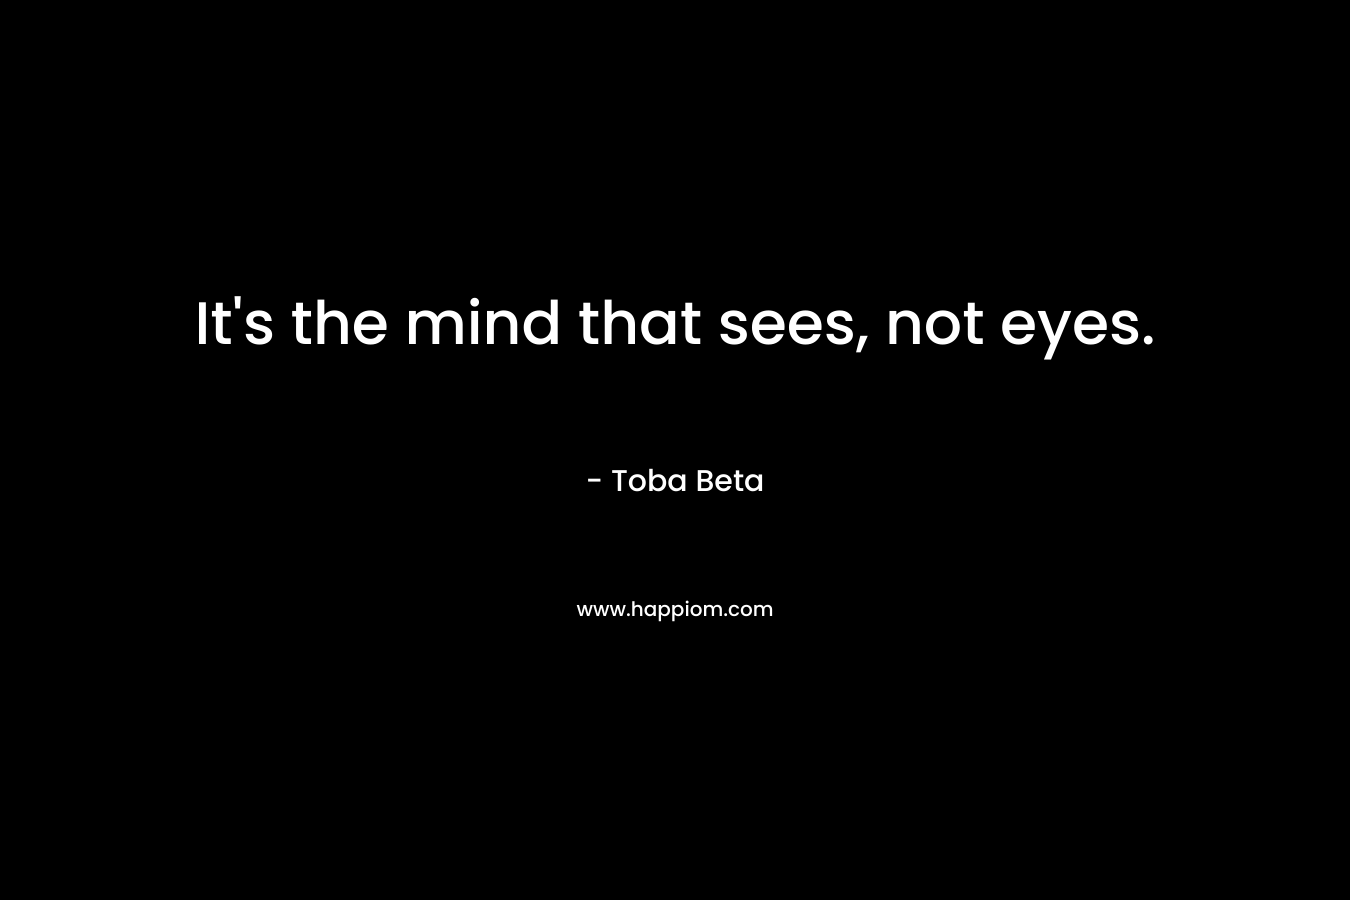 It's the mind that sees, not eyes.